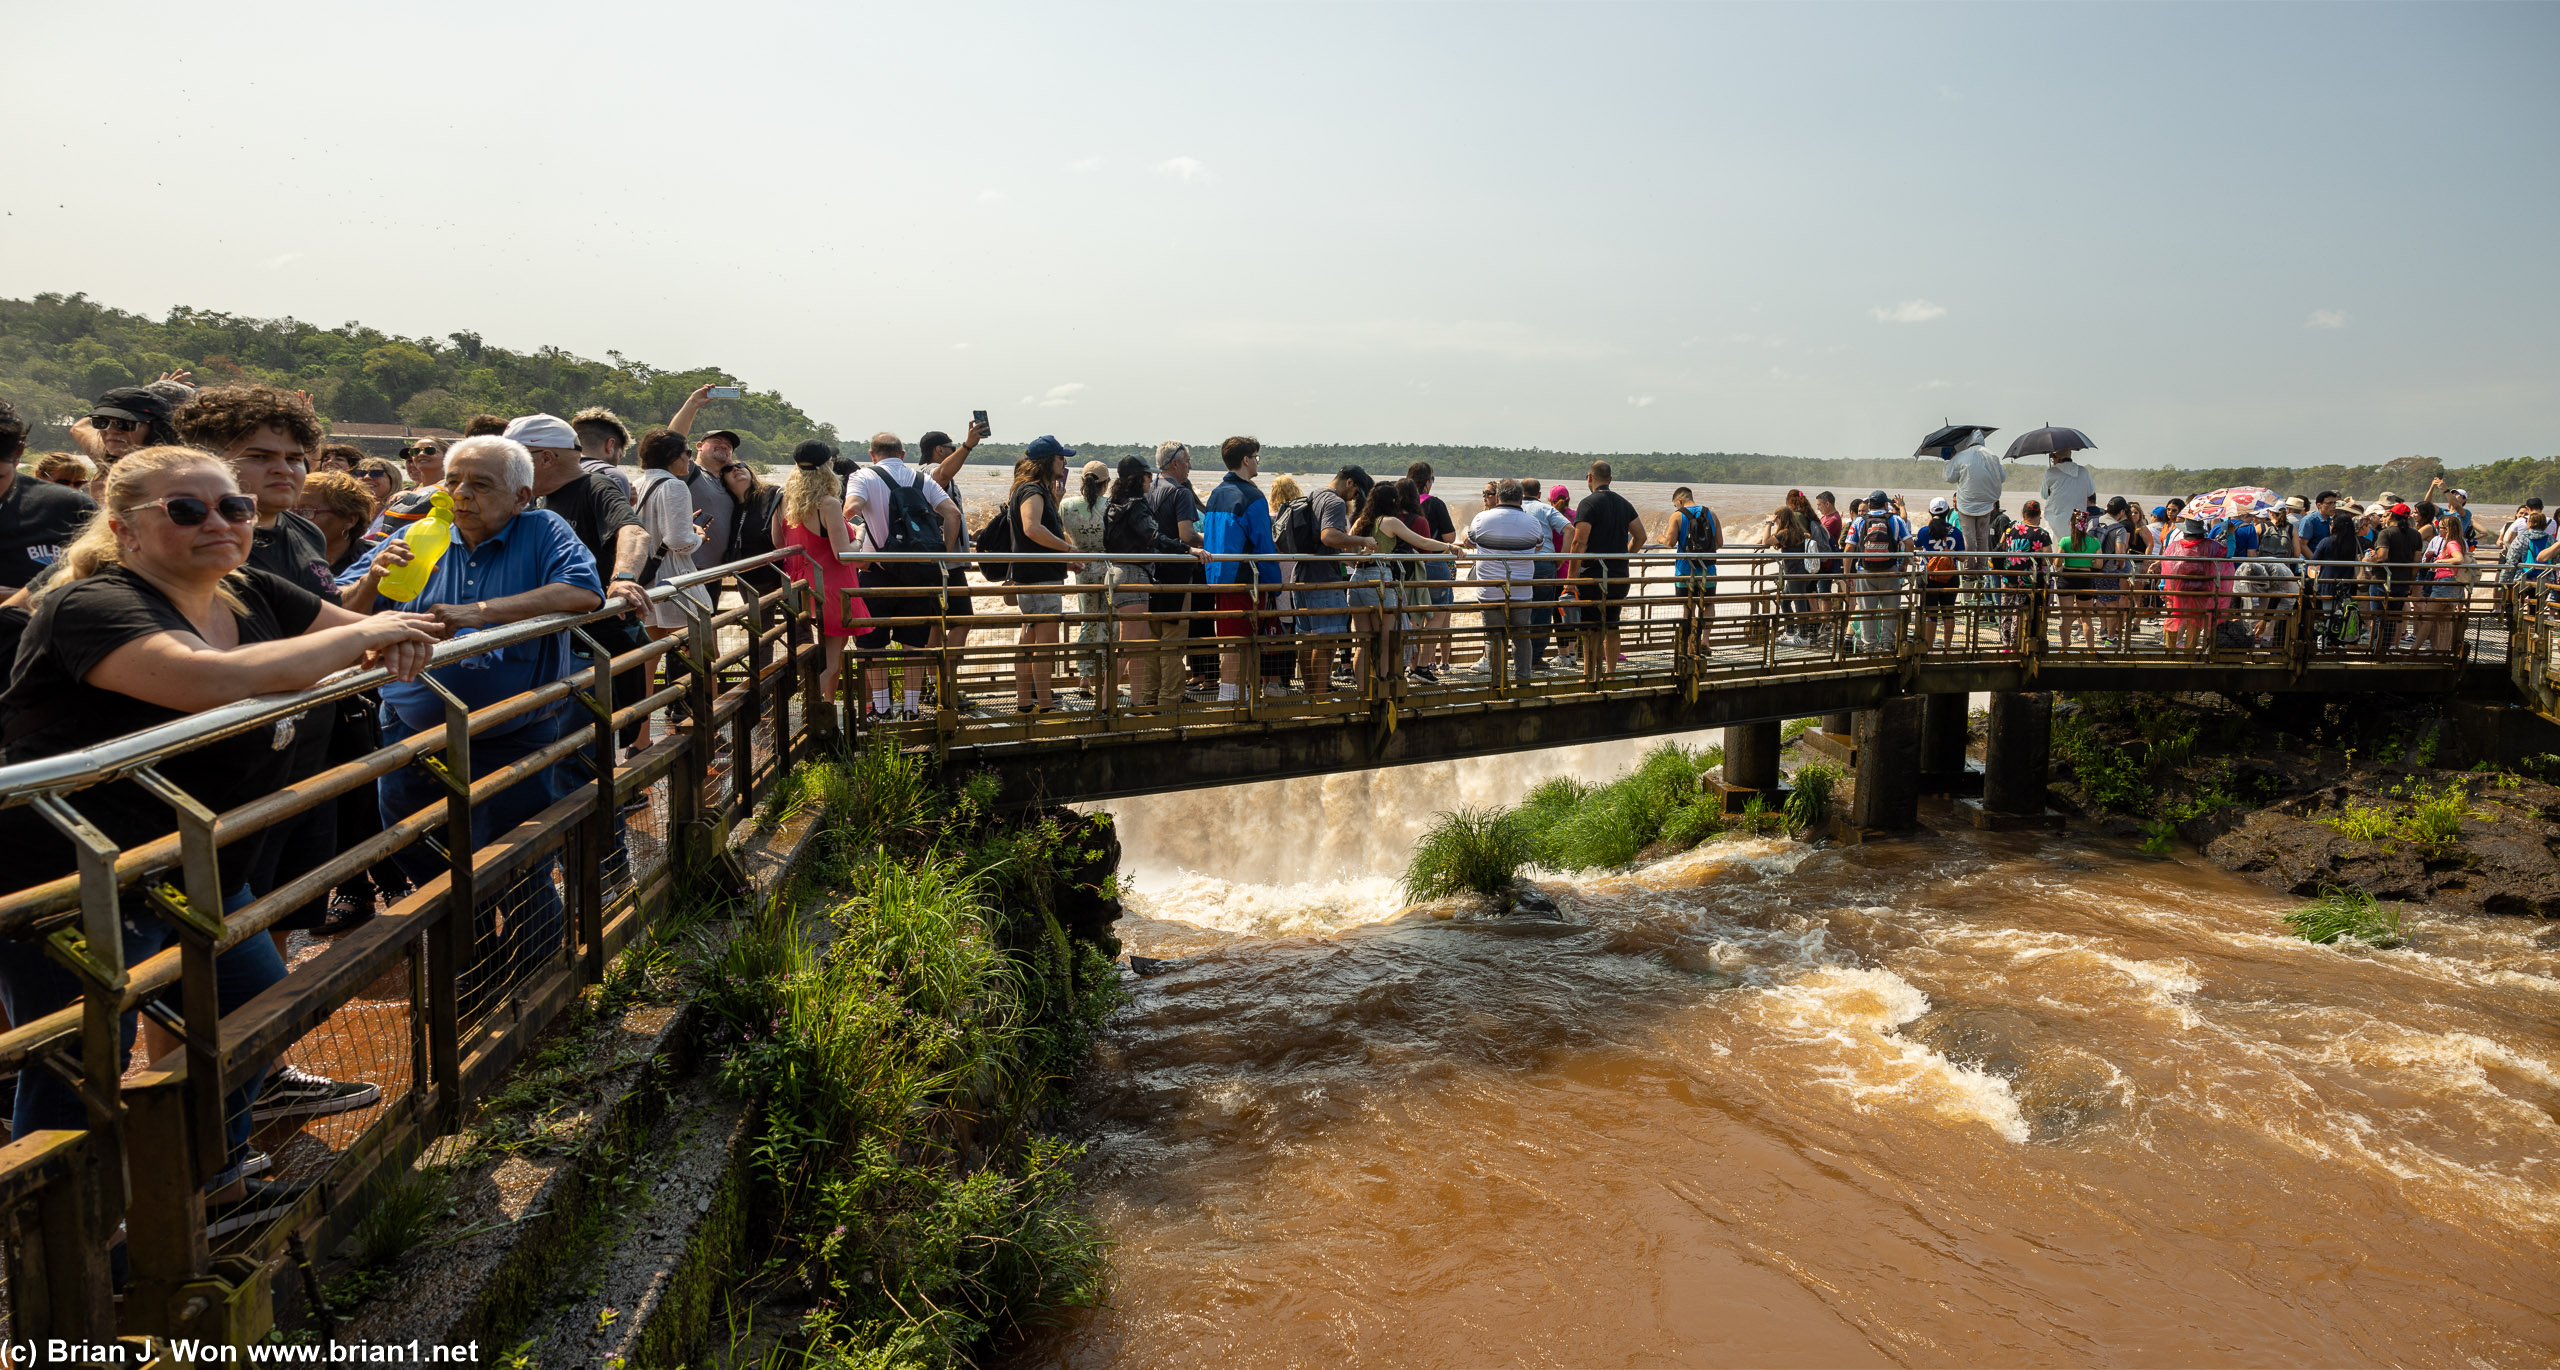 Extensive viewing platforms sunk into the solid basalt that makes up Iguazu Falls.